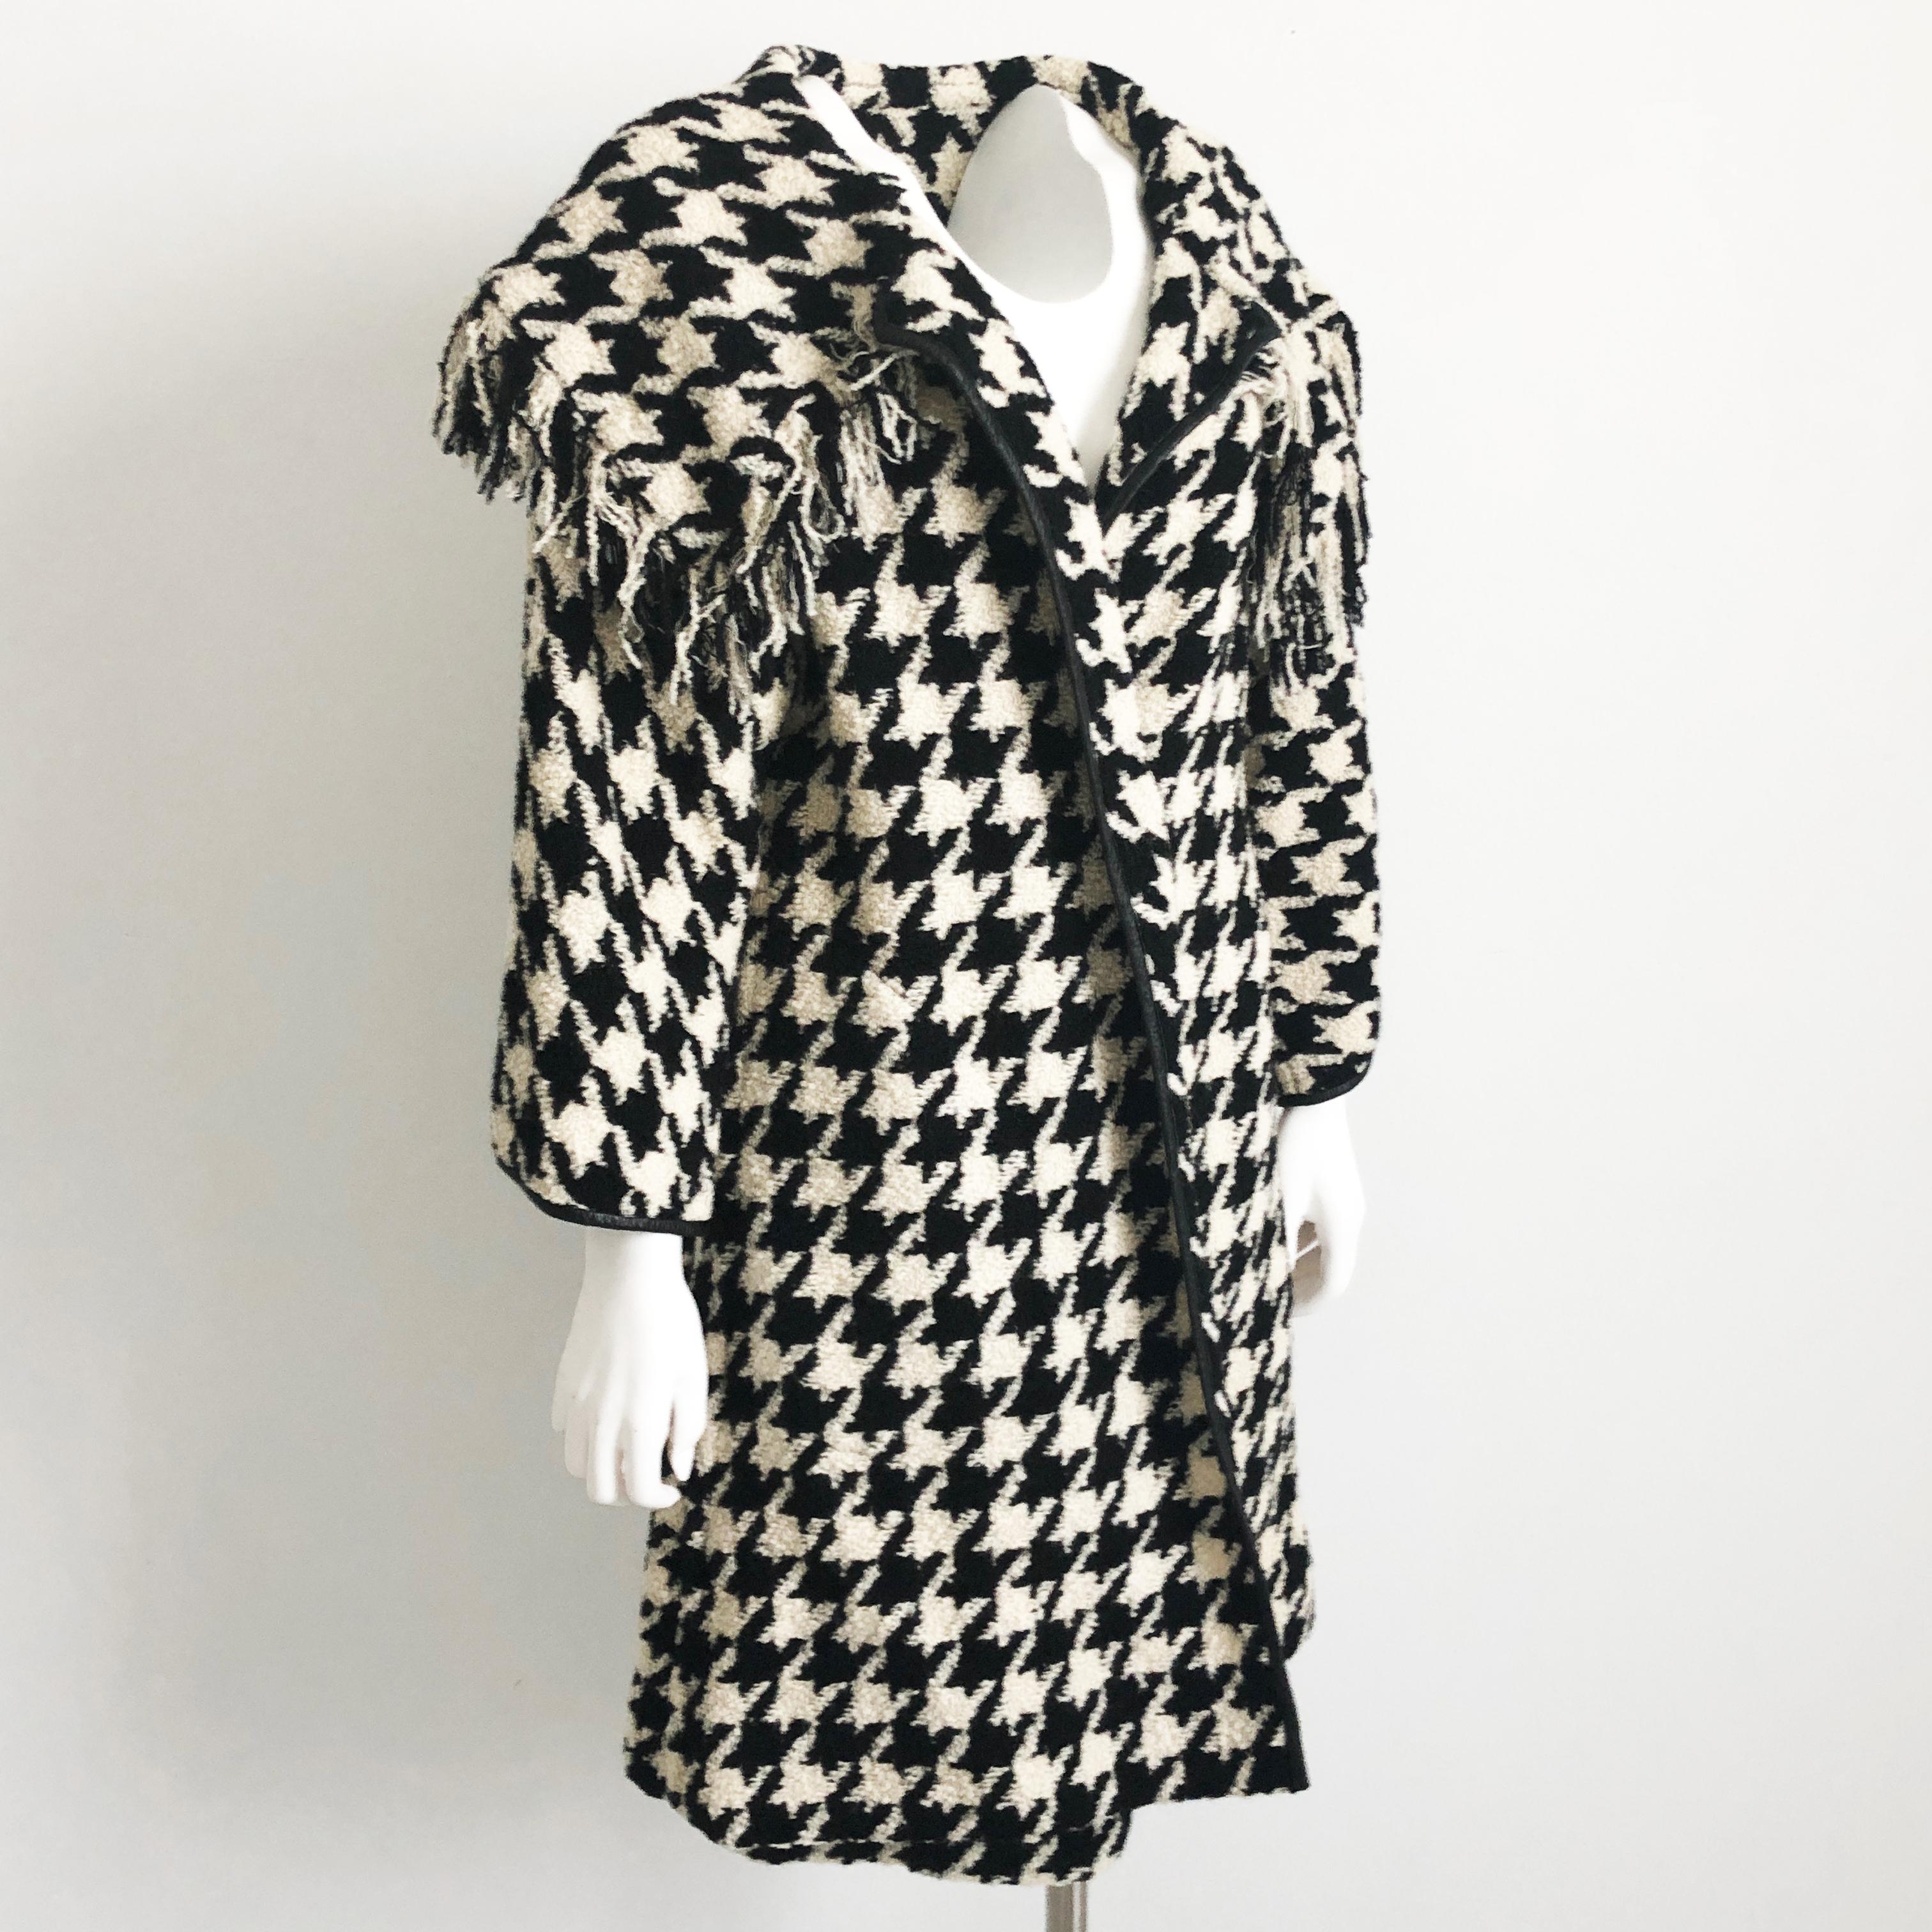 This fabulous ensemble was designed by the mother of American sportswear, Bonnie Cashin. Made from an amazing large houndstooth boucle wool knit, the jacket is trimmed in black leather & features a huge shawl collar with fringed edge.  The pencil